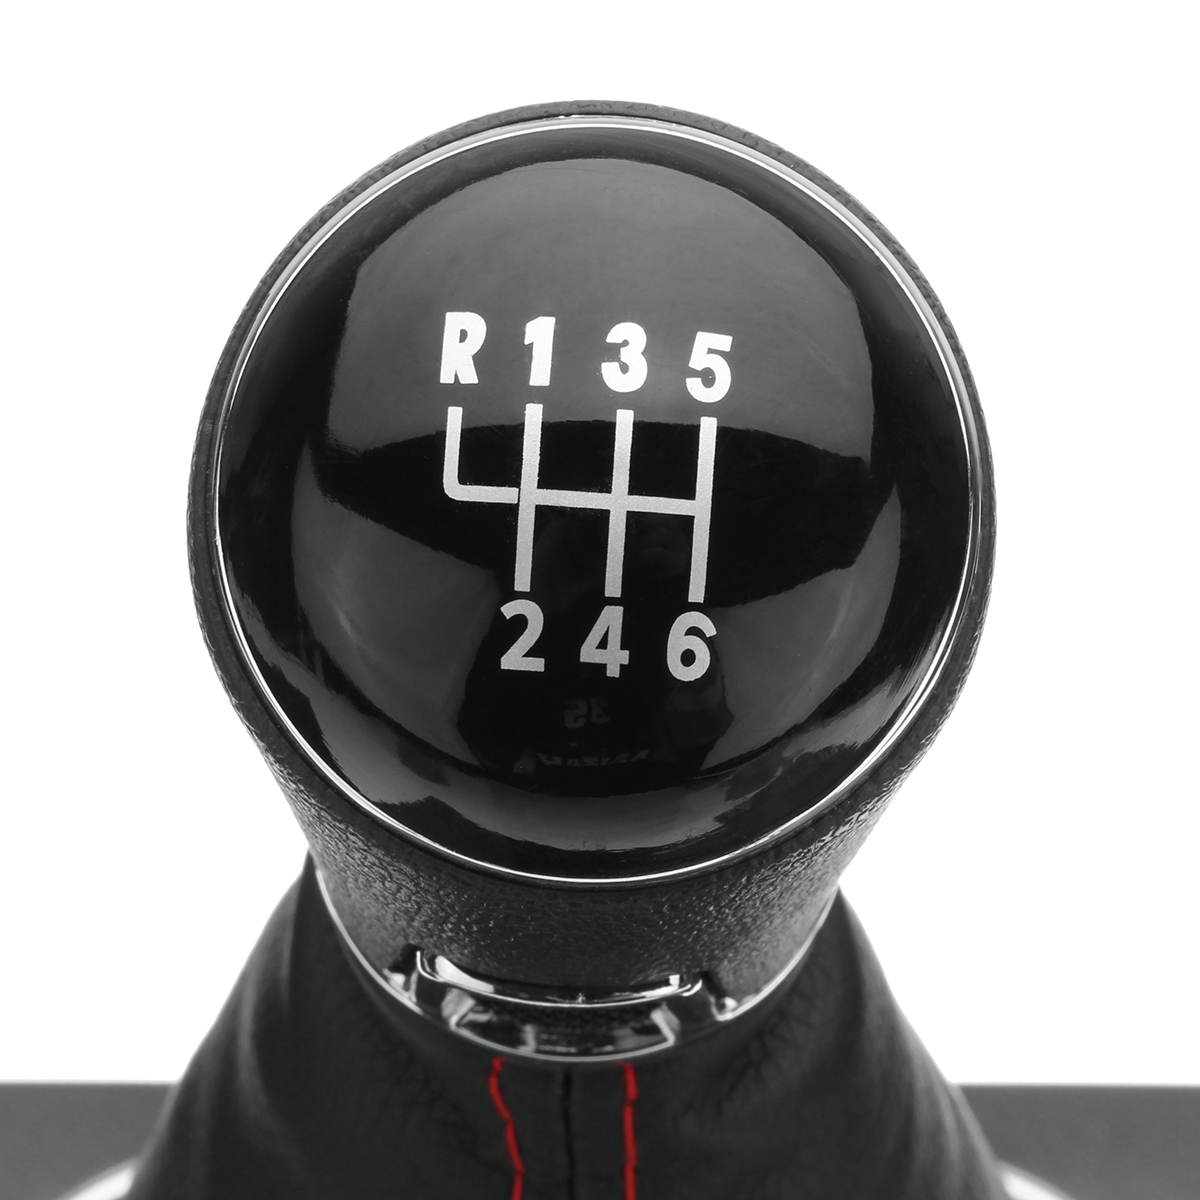 6 Speed Gear Shift Knob Shifter 11Mm Inner PU Leather Boot Gaitor Cover for VW Golf 5 6 - Auto GoShop